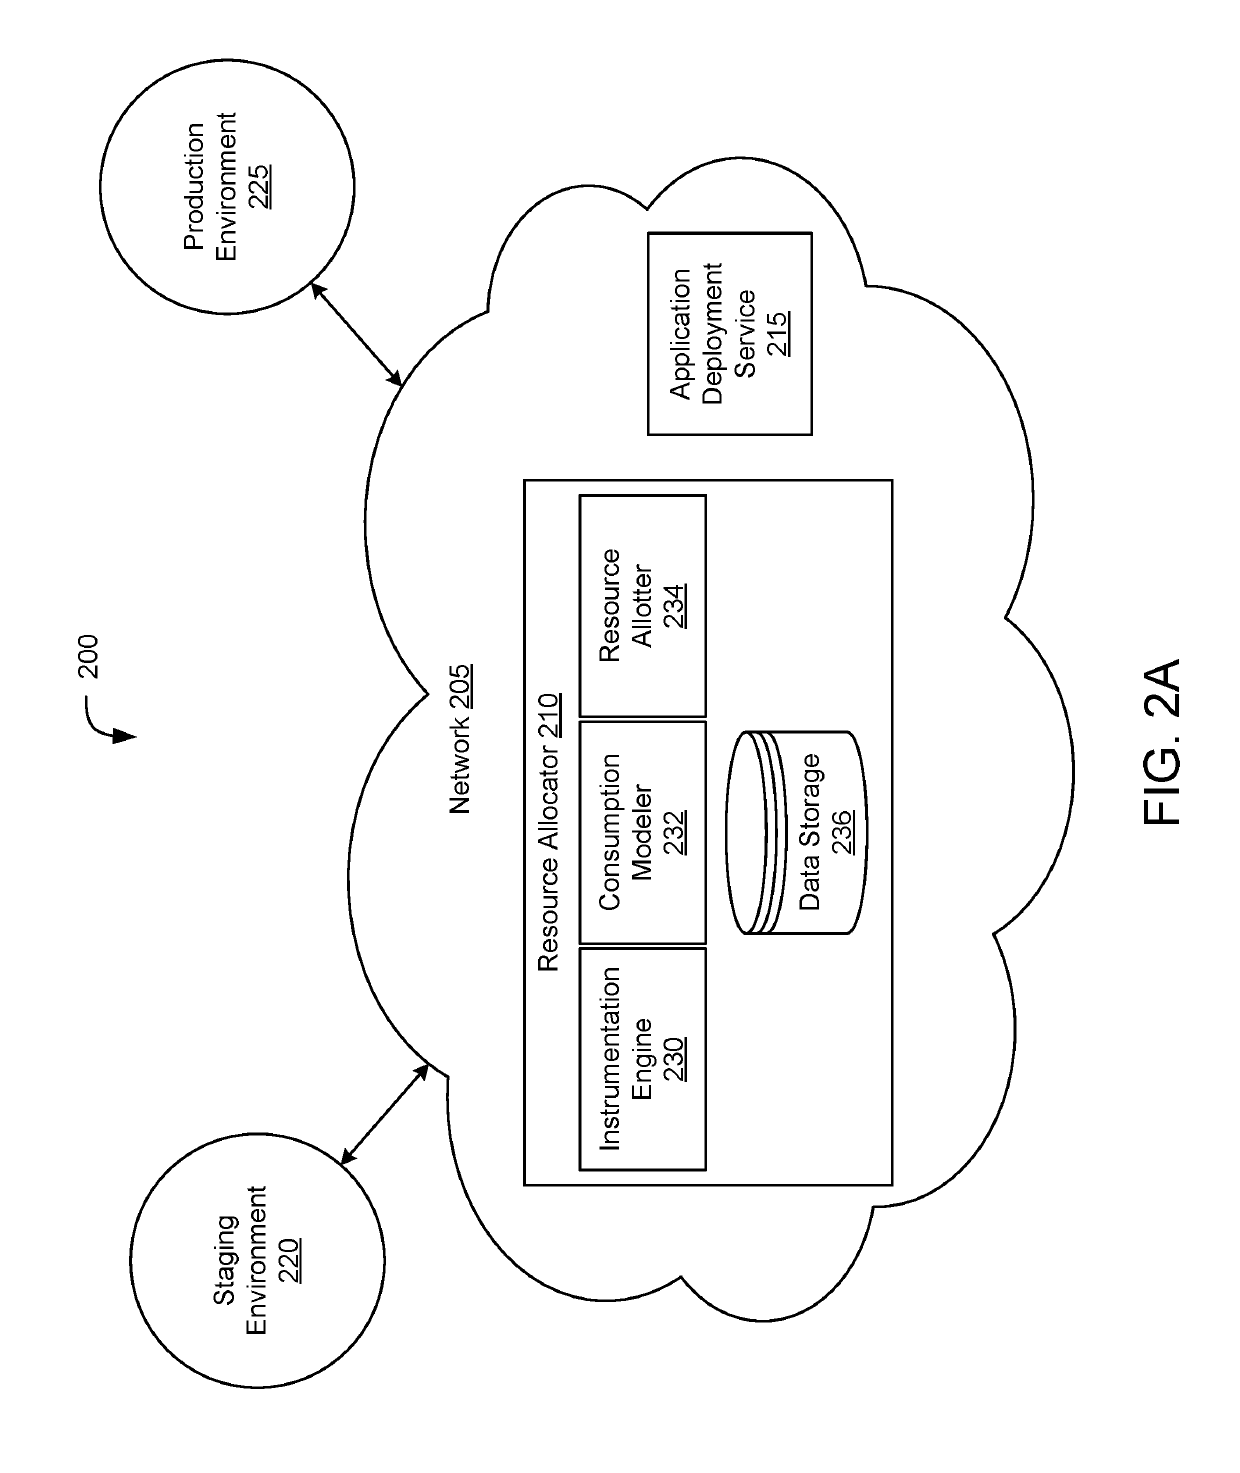 Auto-scaling for allocation of cloud service resources in application deployments